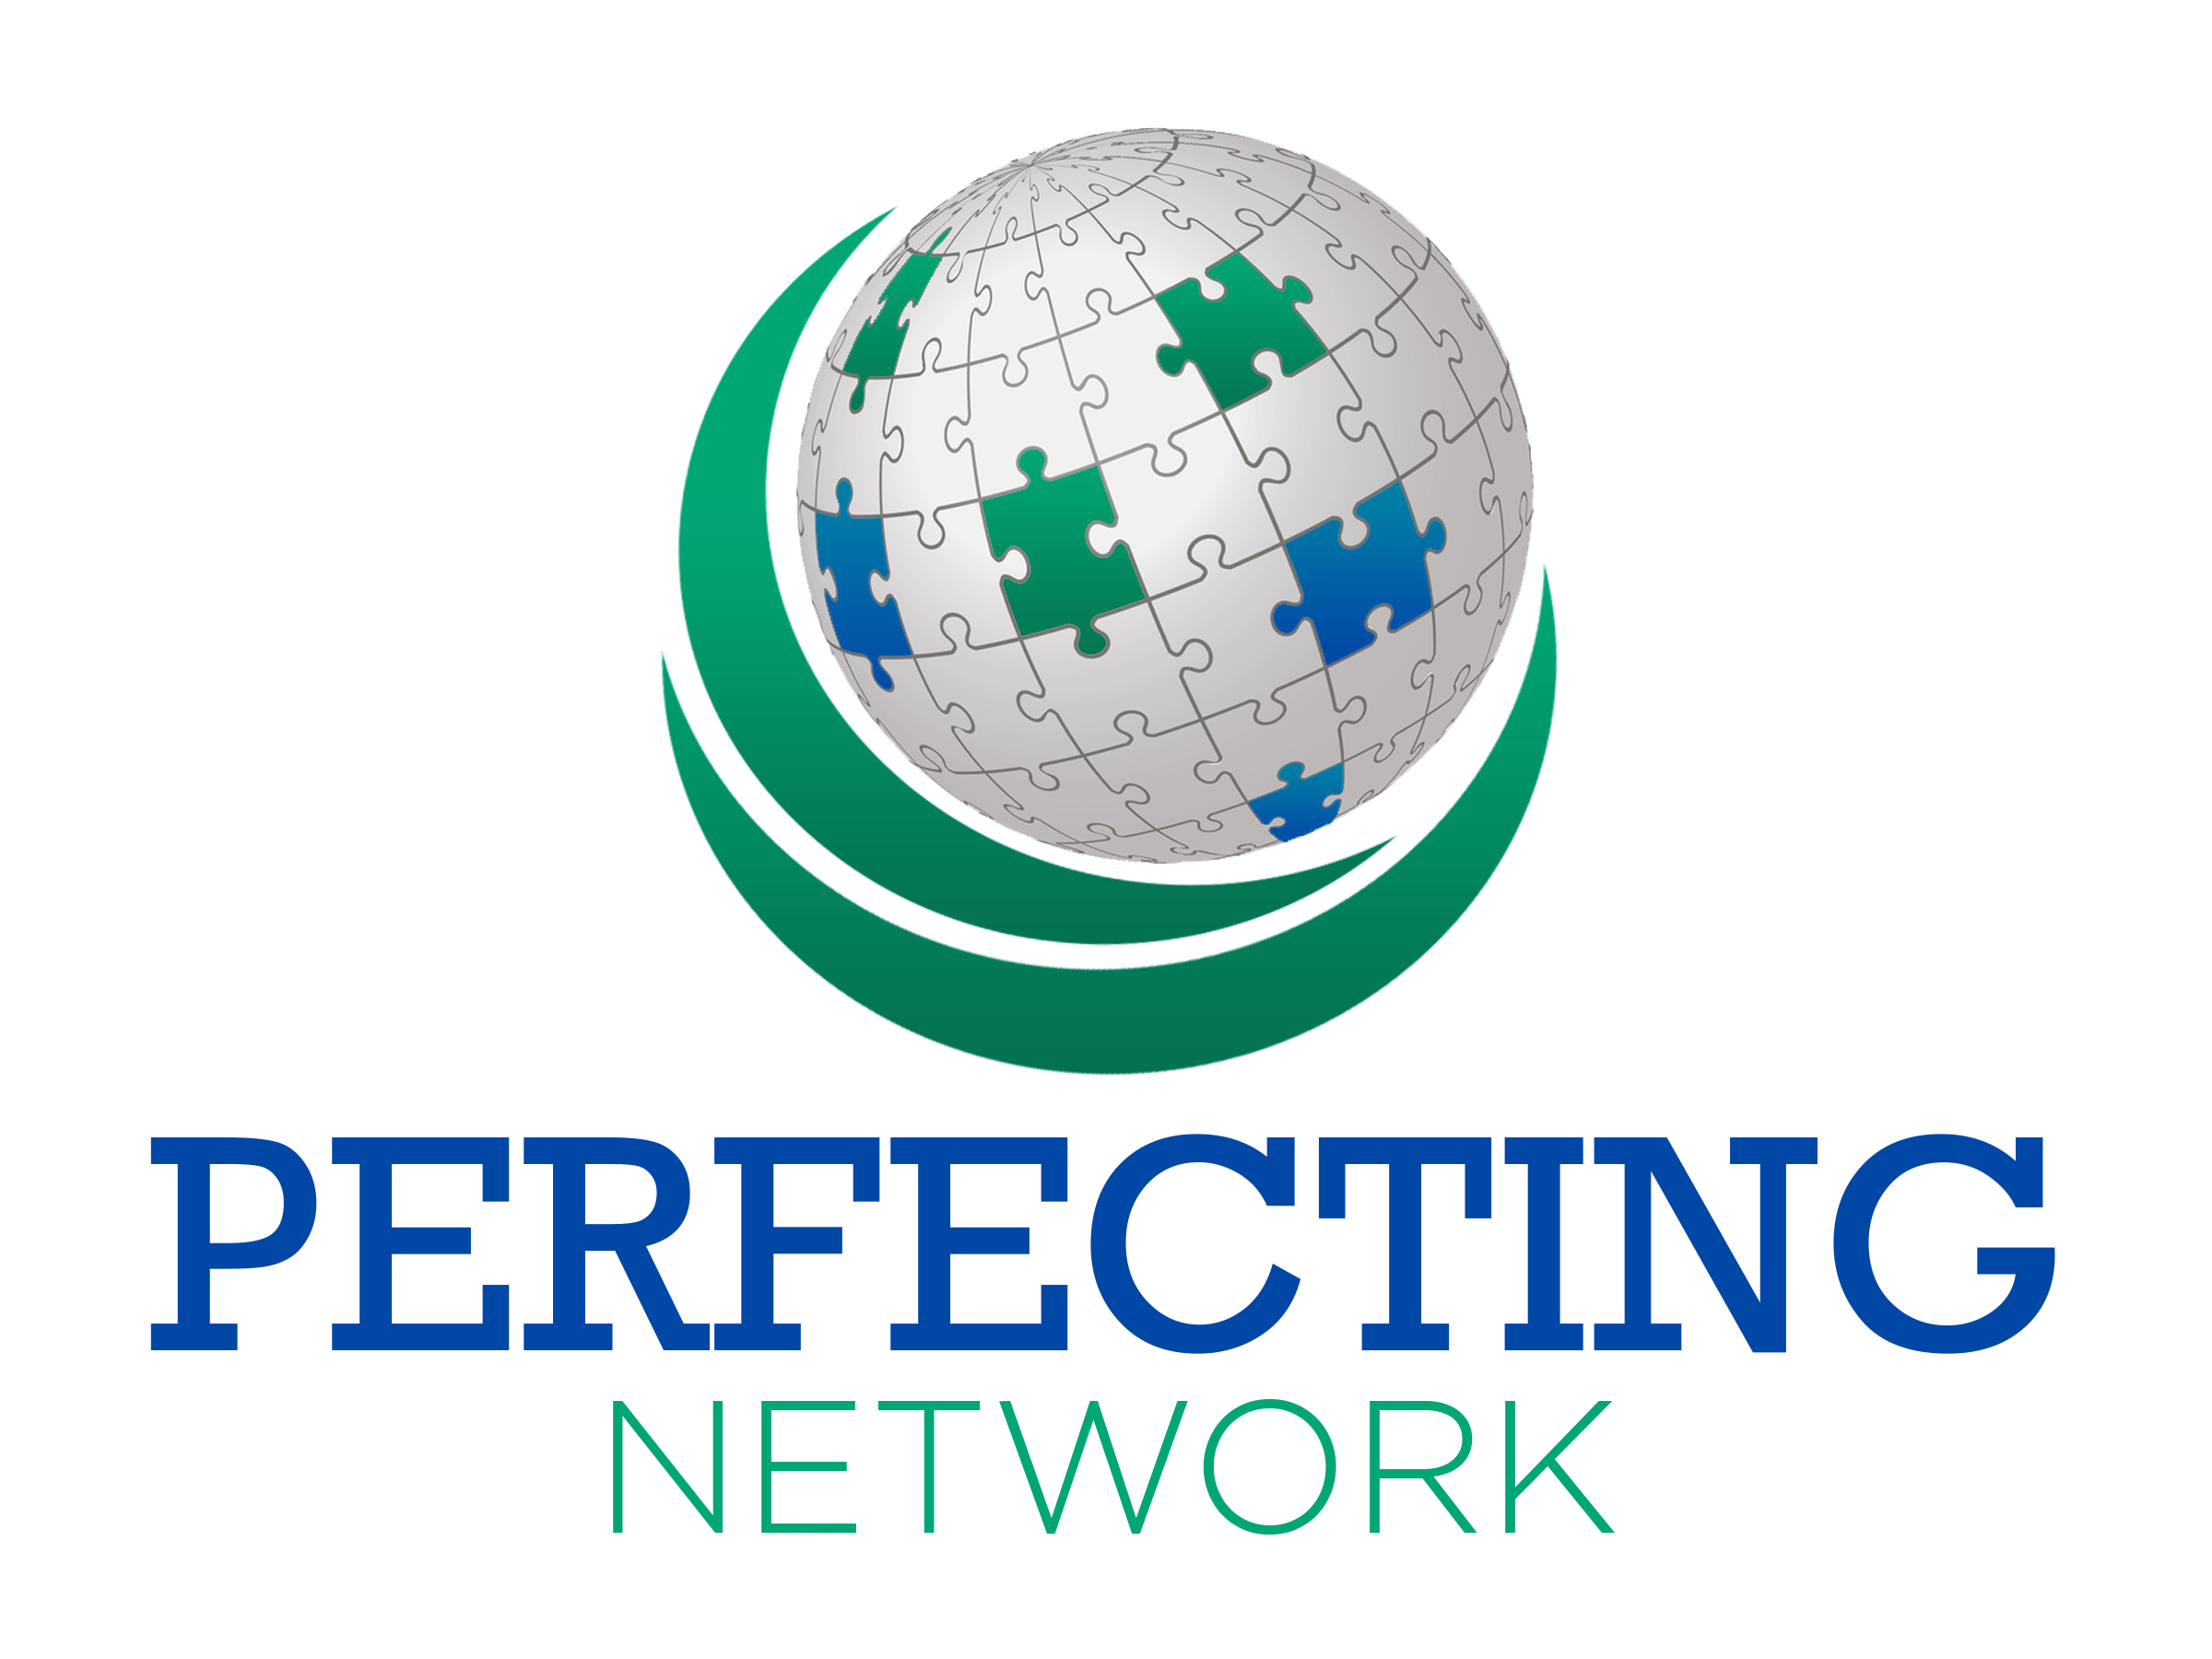 Perfecting Network